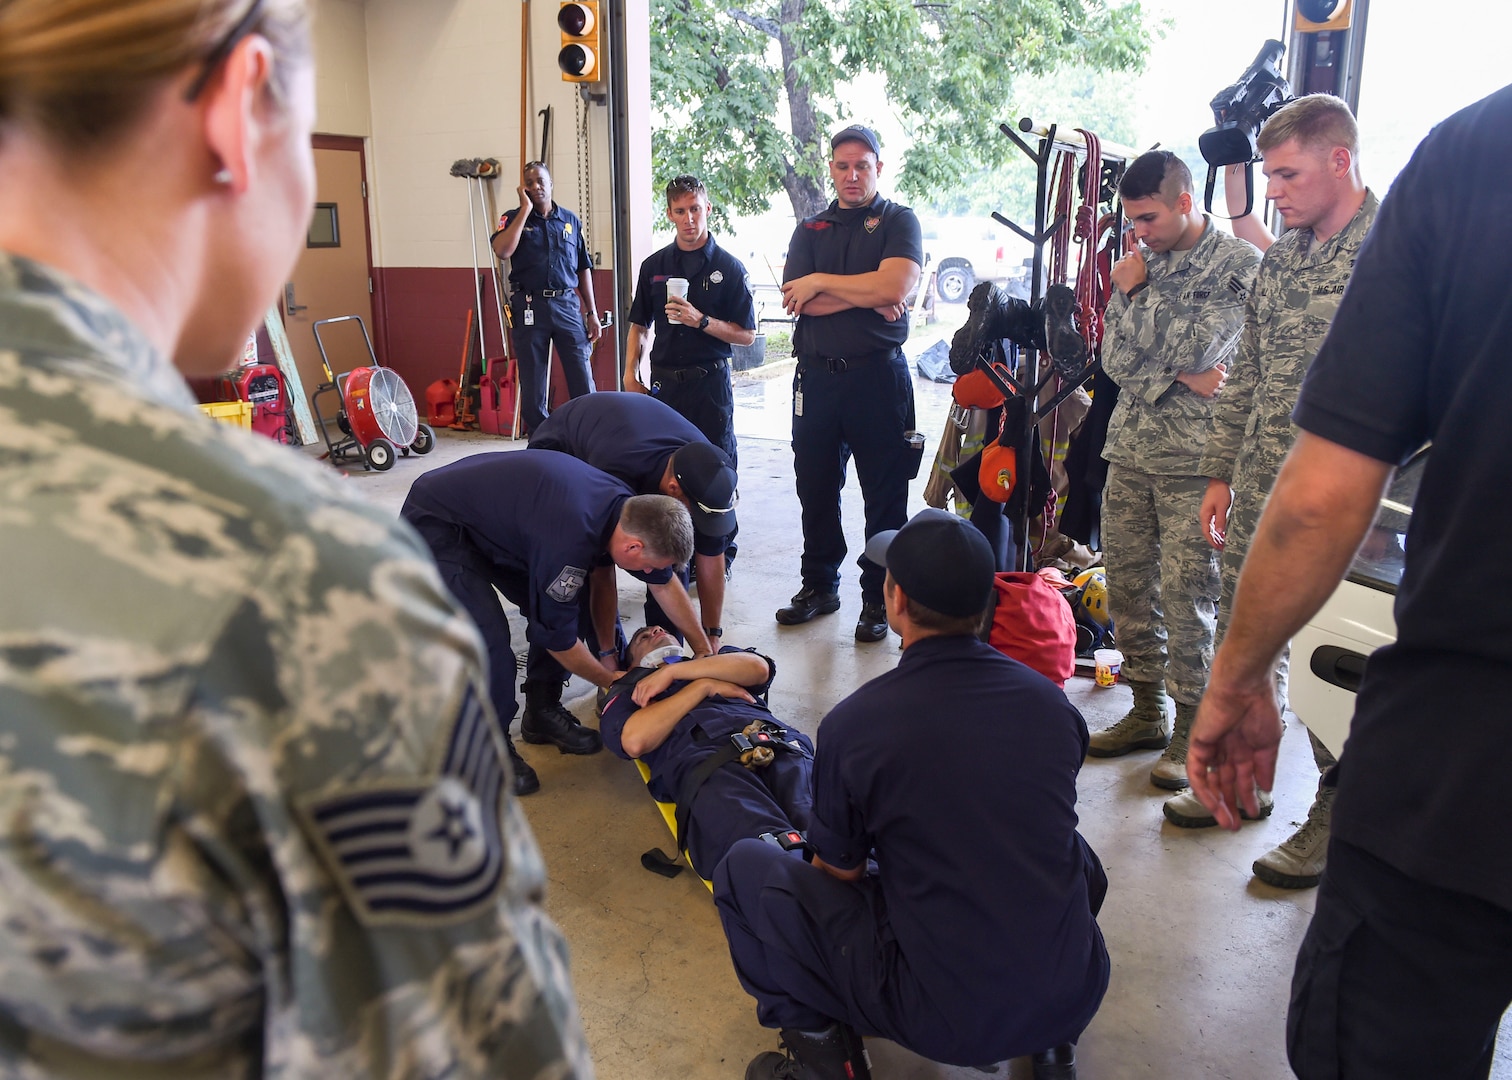 Medics from the 59th Medical Wing observe as members the San Antonio Fire Department technical rescue team extract a simulated patient from a vehicle Aug. 13, 2016 at Fire Station 11 in San Antonio. The joint training gave participants an opportunity to strengthen their partnership, which will benefit the citizens they serve.  (U.S. Air Force photo/Staff Sgt. Michael Ellis)